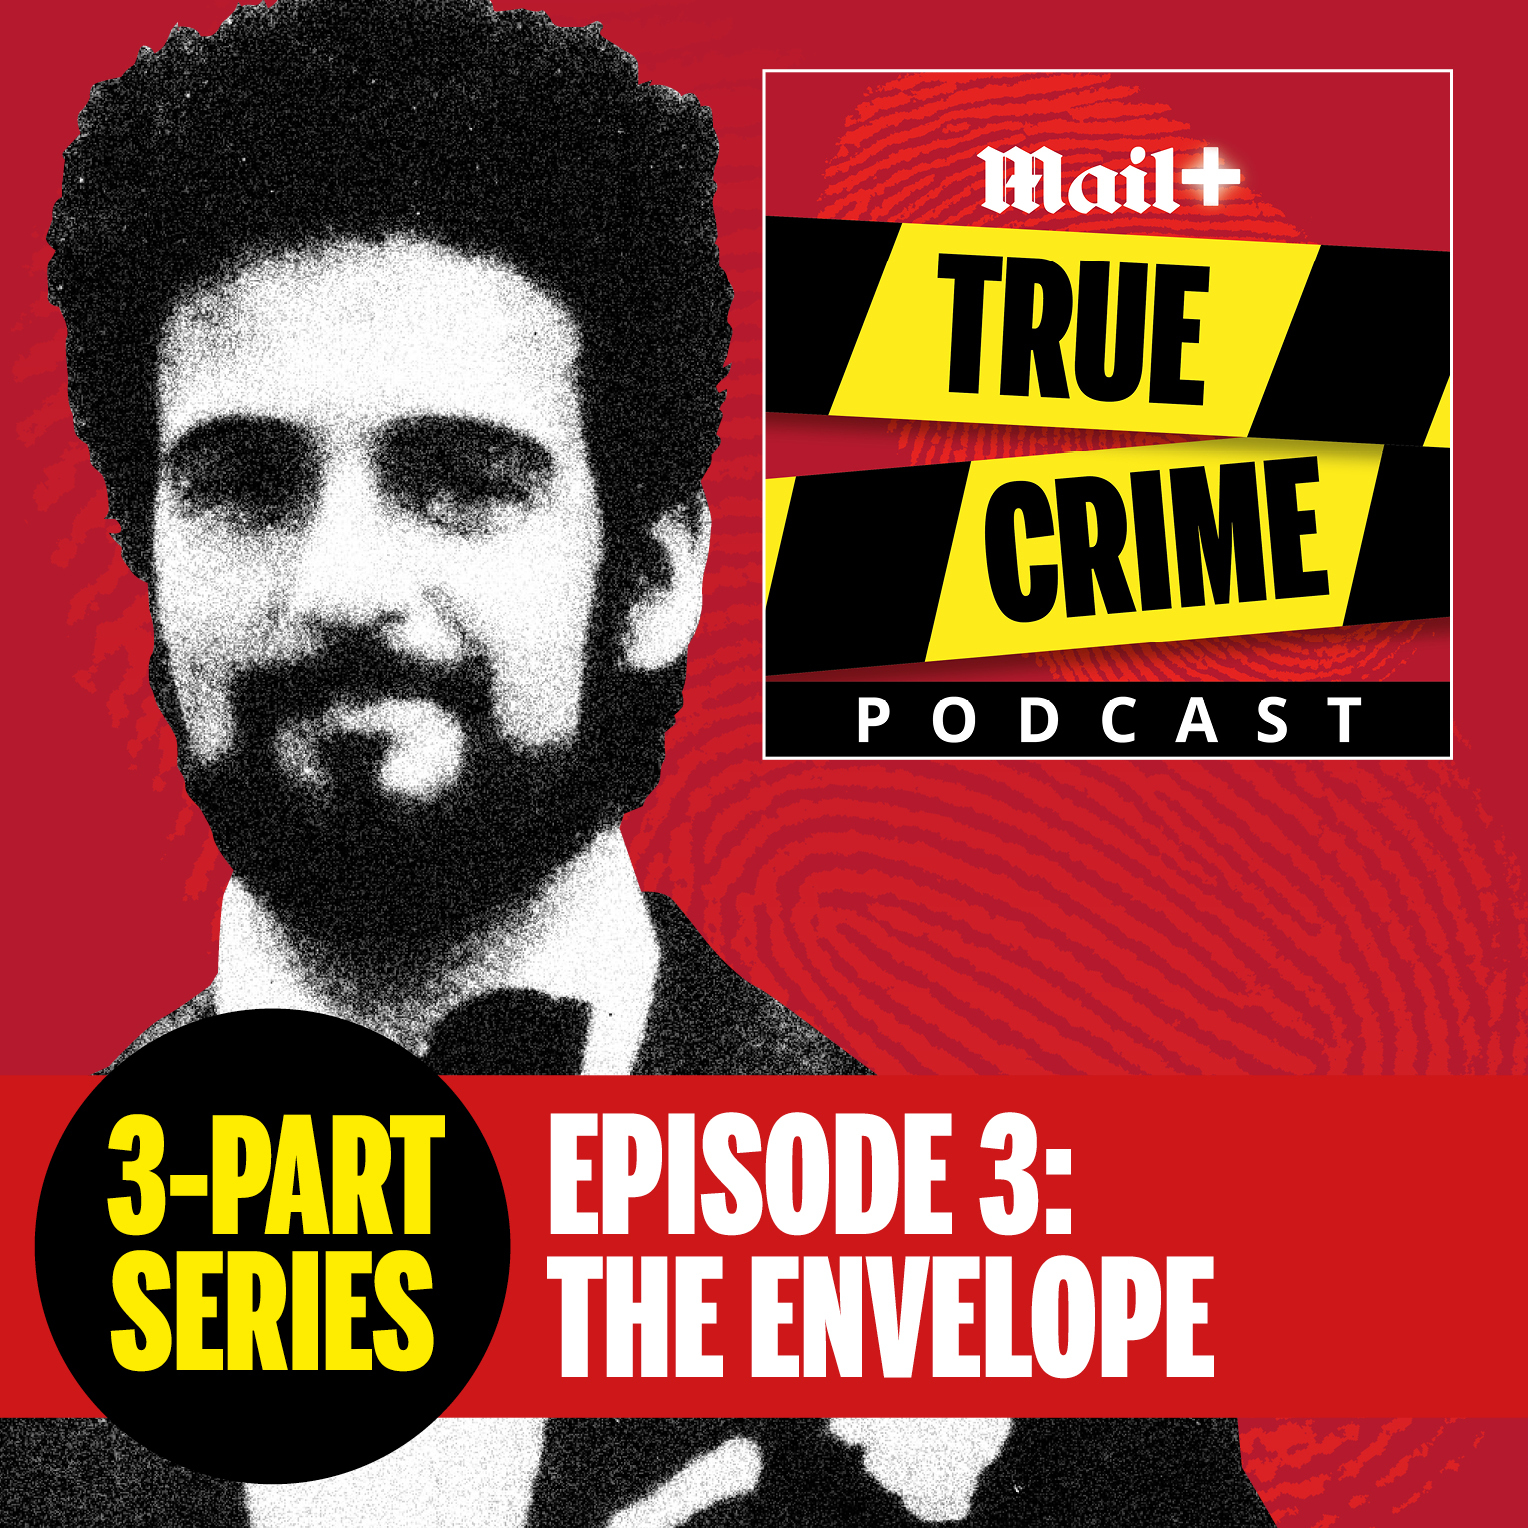 The Yorkshire Ripper: A Detective's Story - Episode 3